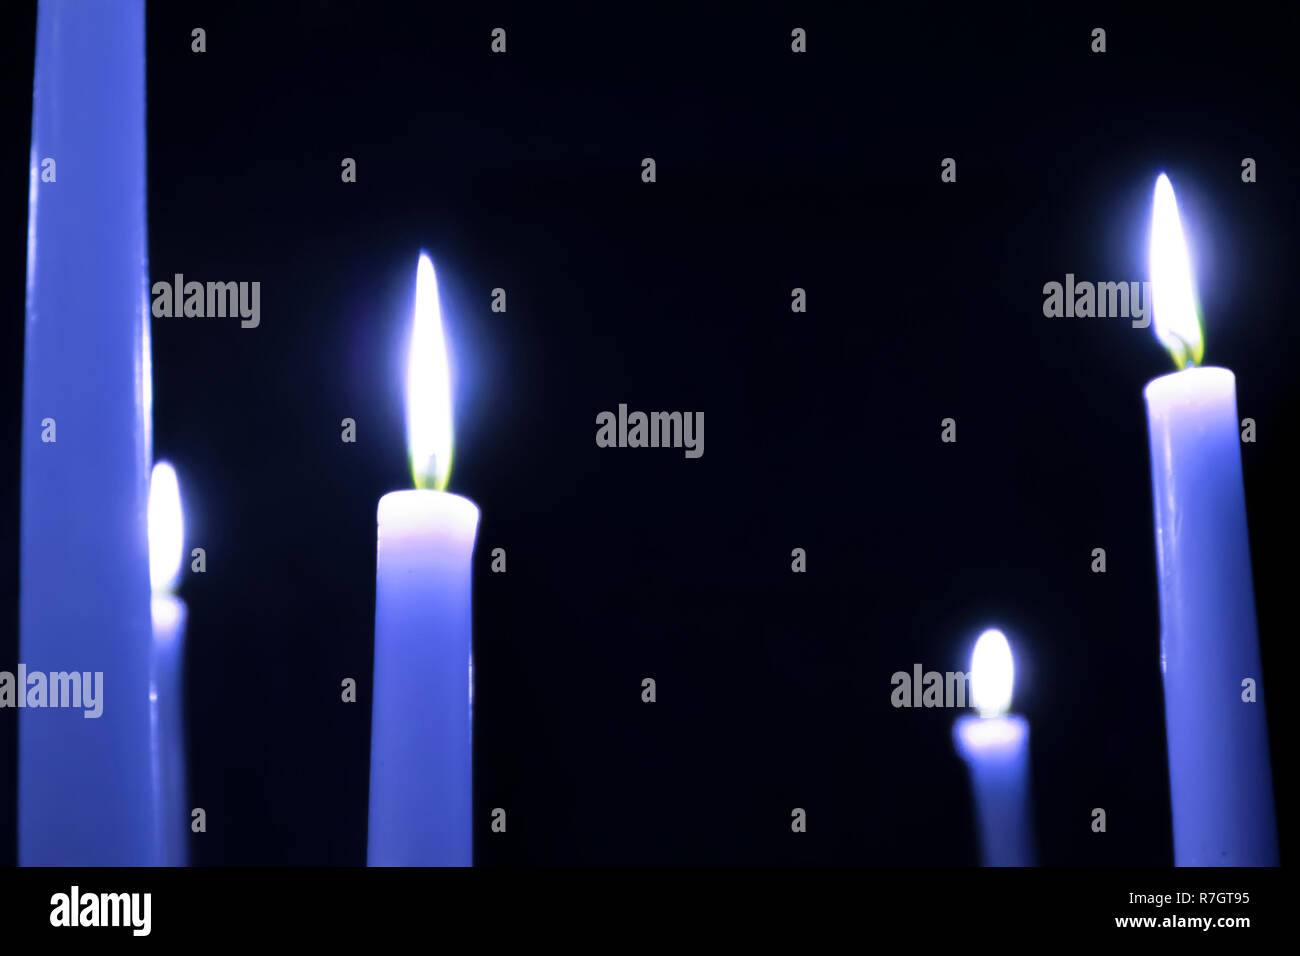 A number of burning blue candles with blurred forks of flame against dark background Stock Photo